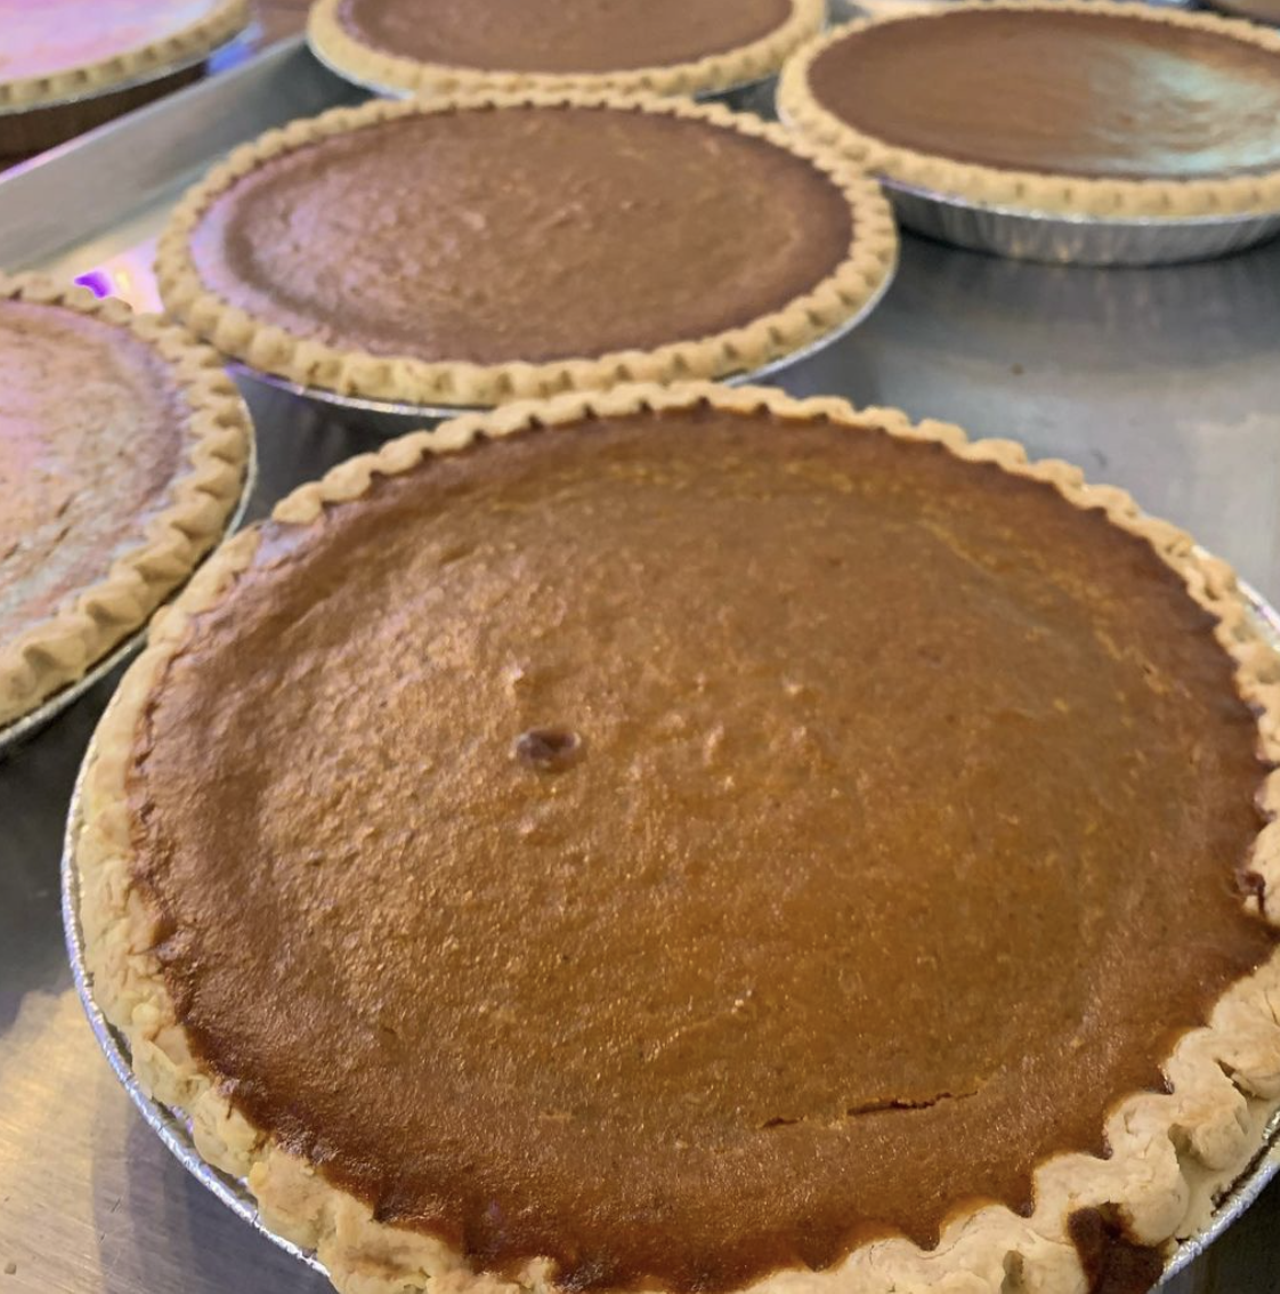 Earl Abel's
1639 Broadway St., (210) 444-9424, earlabelssa.com
This SA staple has pies on pies available for the holiday, including the traditional pumpkin pastry. The eatery is currently offering a $5 discount on your initial online  order, and pie aficionados can also order through Postmates, GrubHub, DoorDash and JoyRun.
Photo via Instagram / earlabels_restaurant